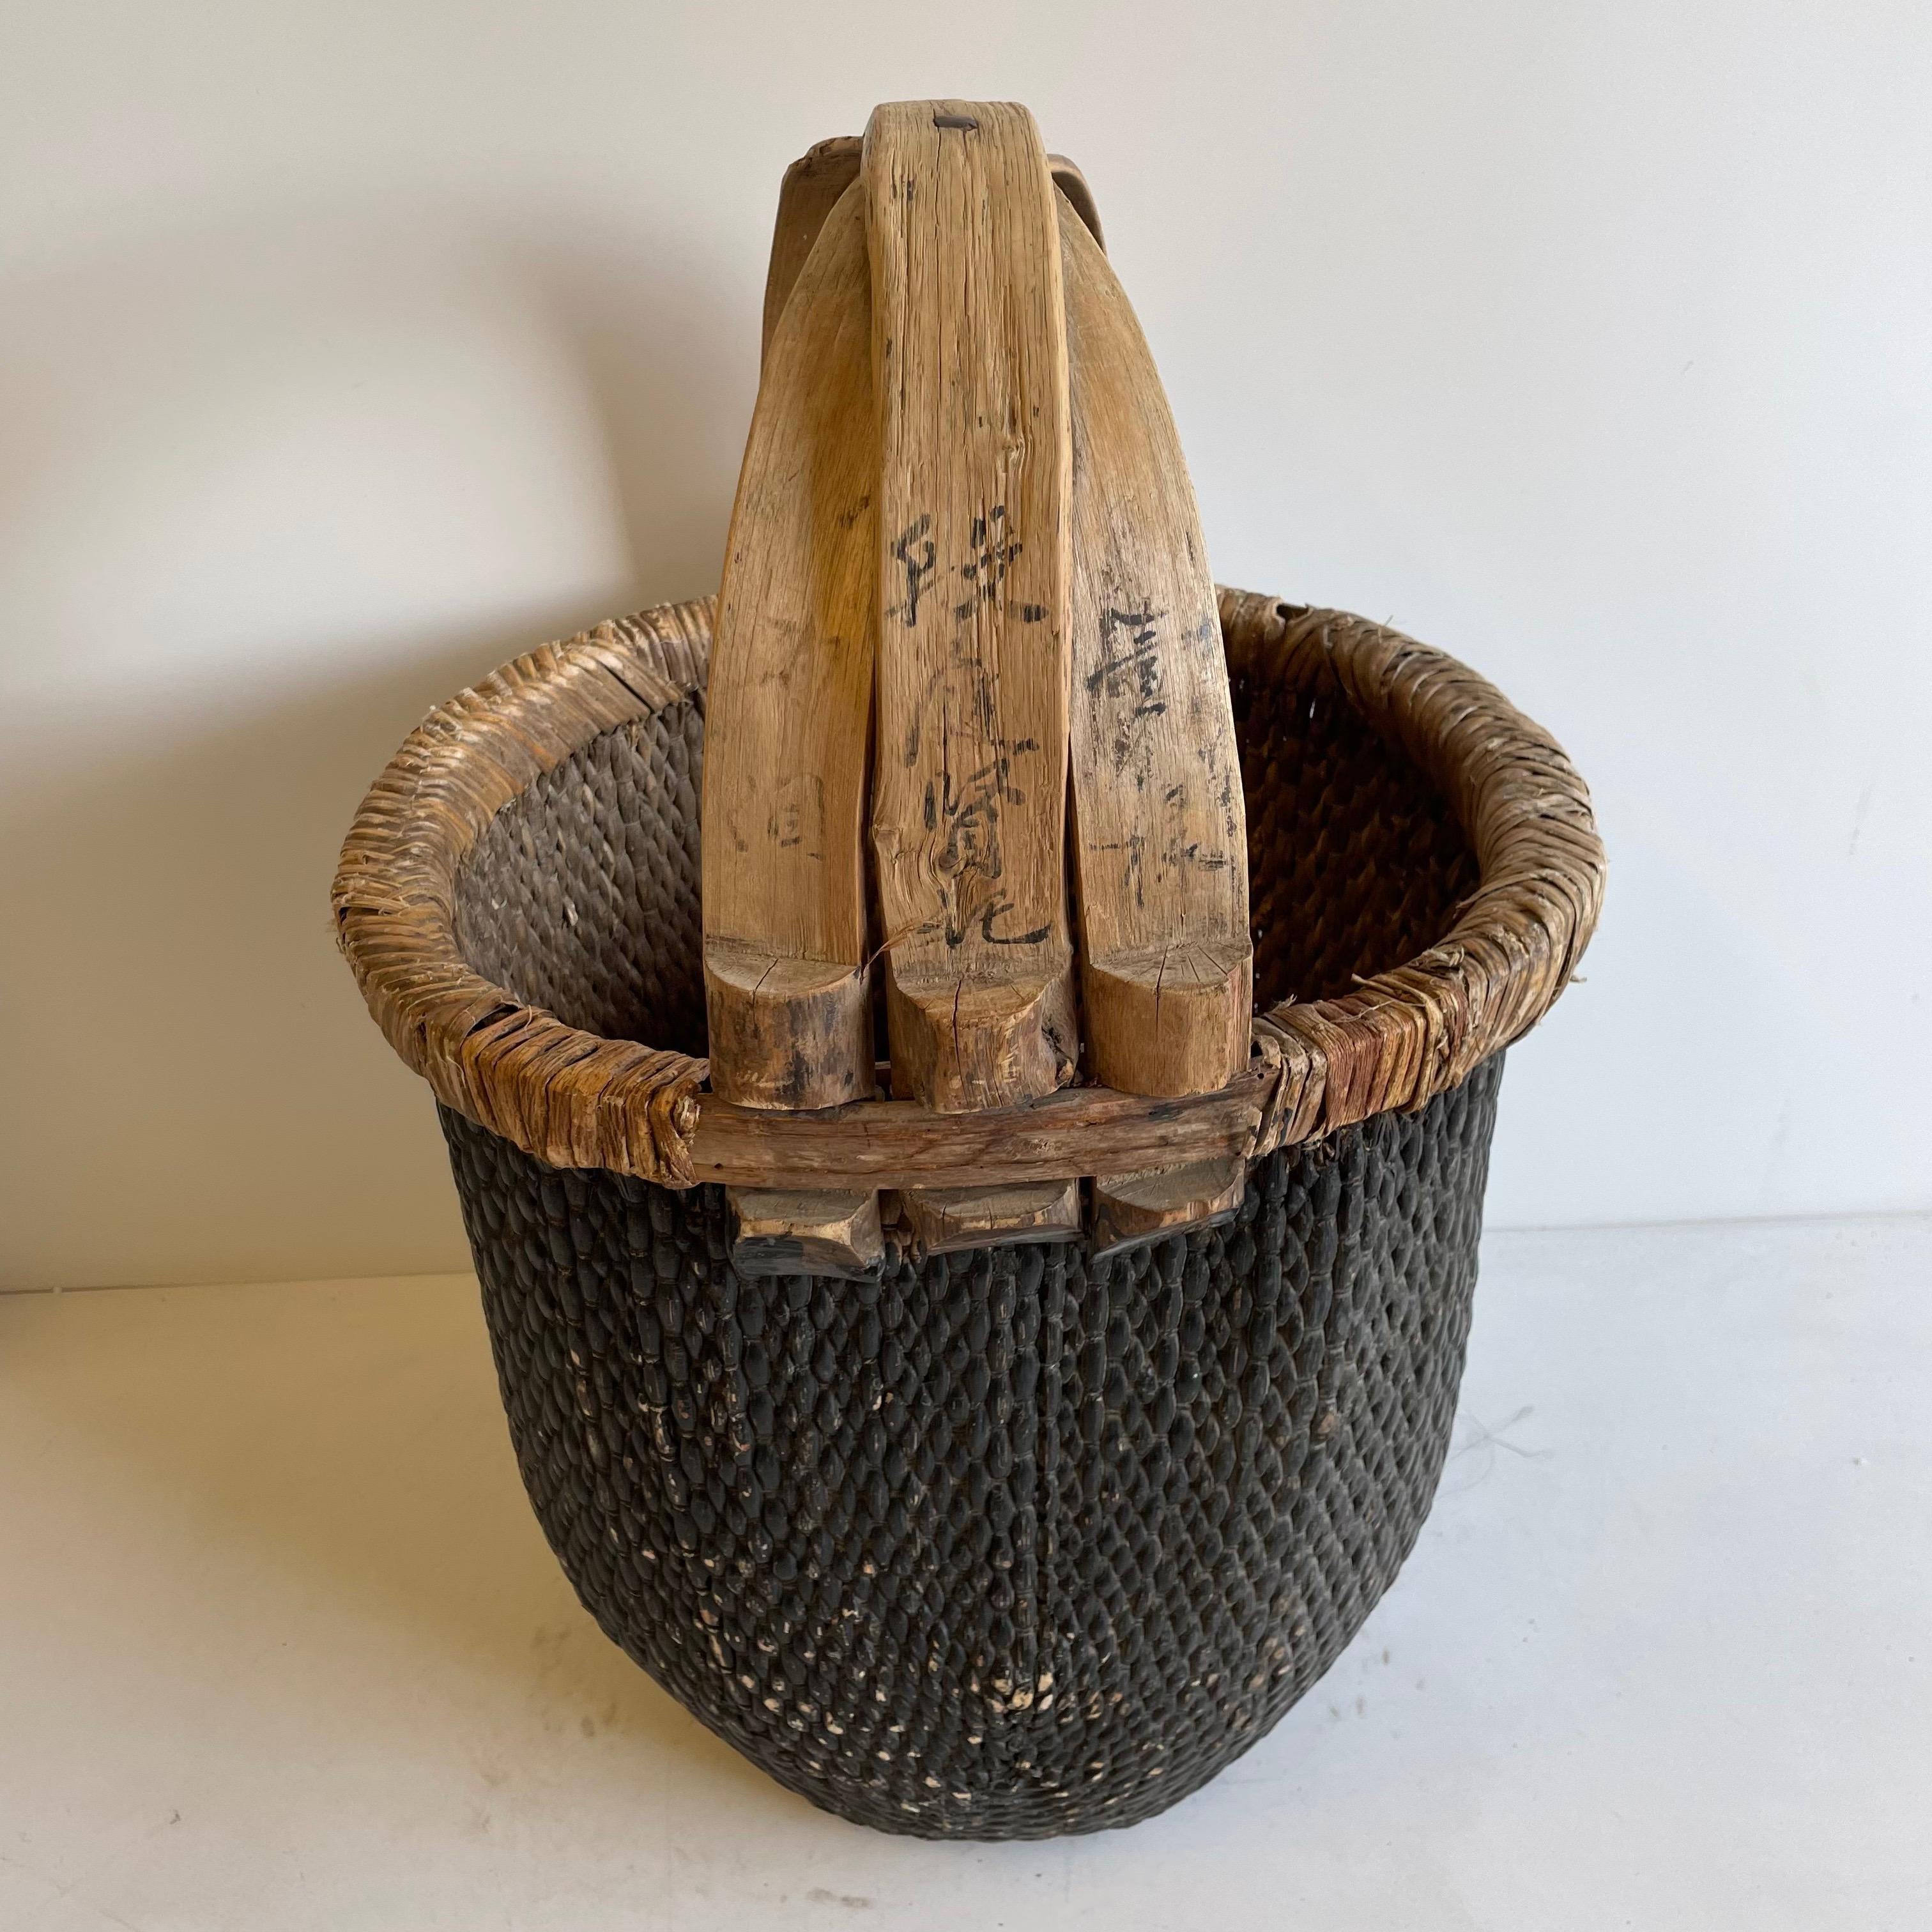 Vintage woven wicker basket with handle
Size: 15 x 15 x 23.5
Origin: Asia, 20th century.